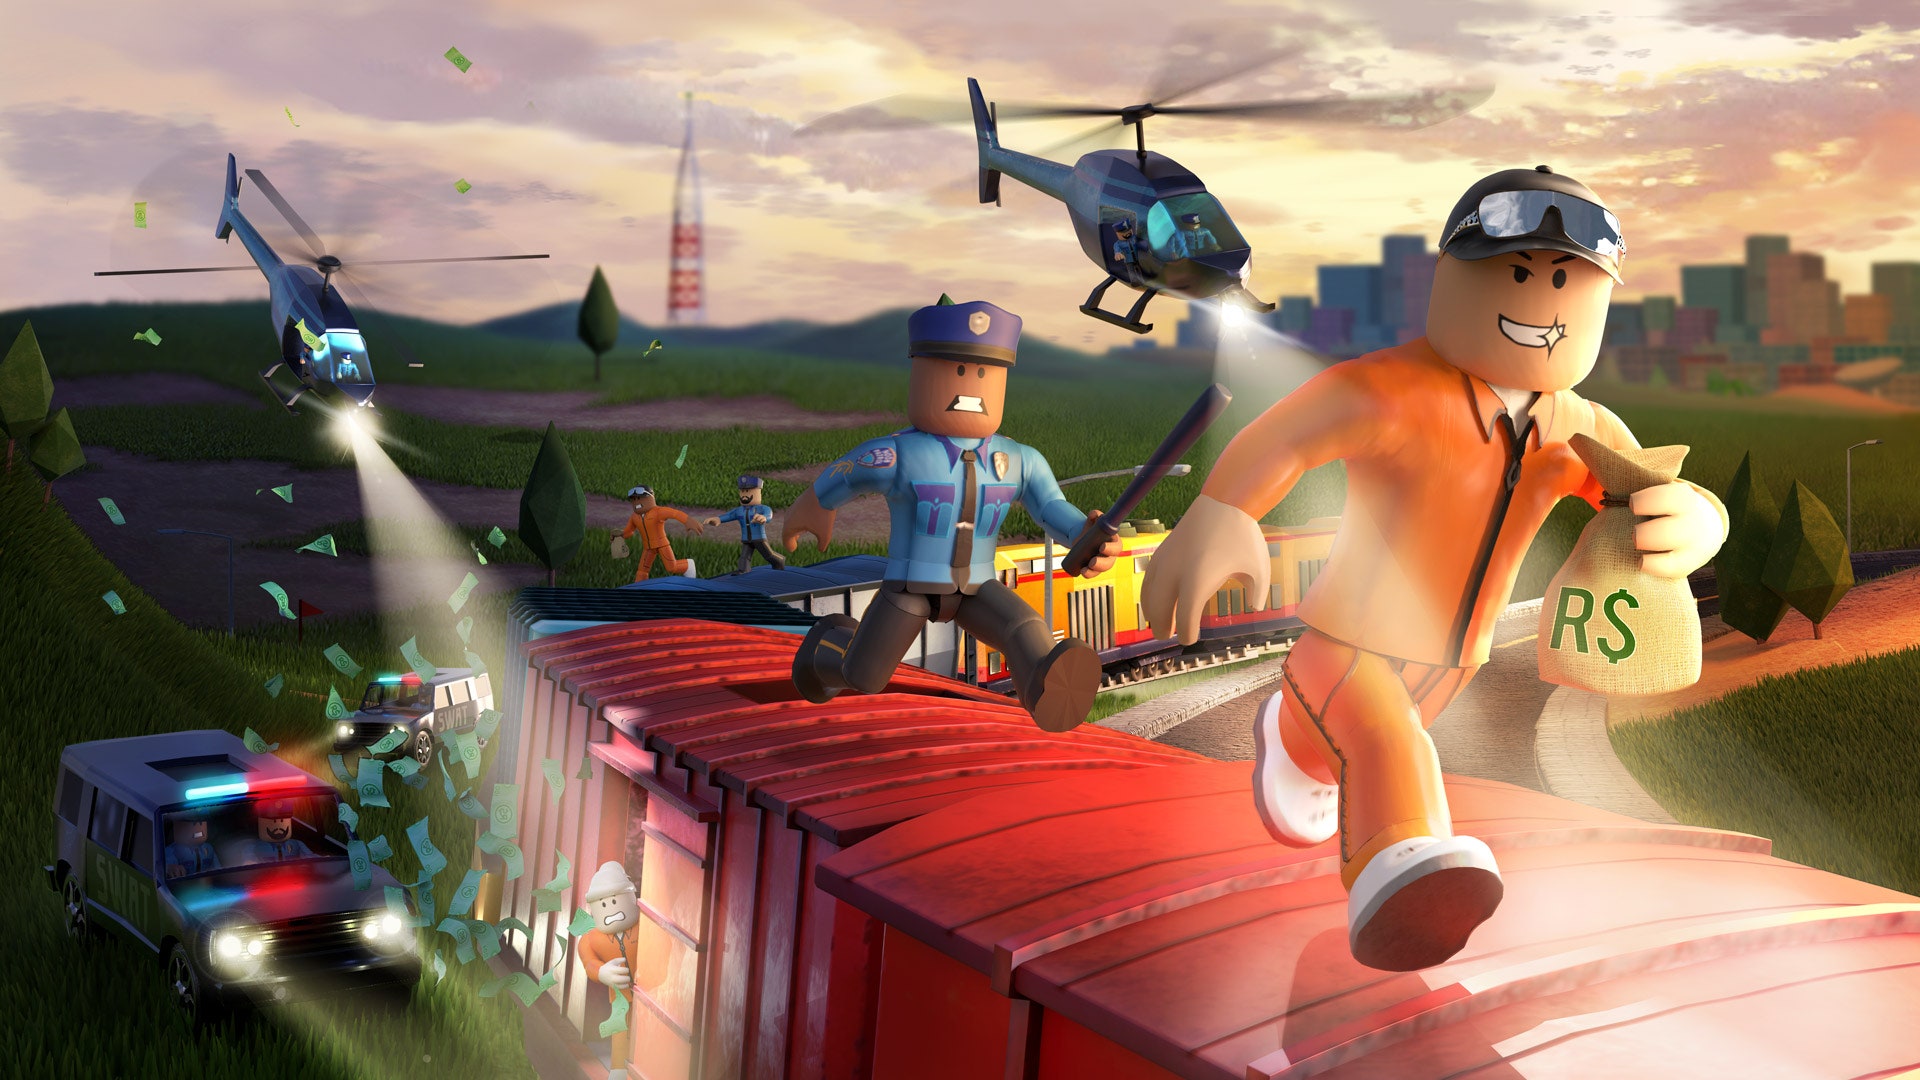 What You Want to Know About Roblox—and Why Children Are Obsessed